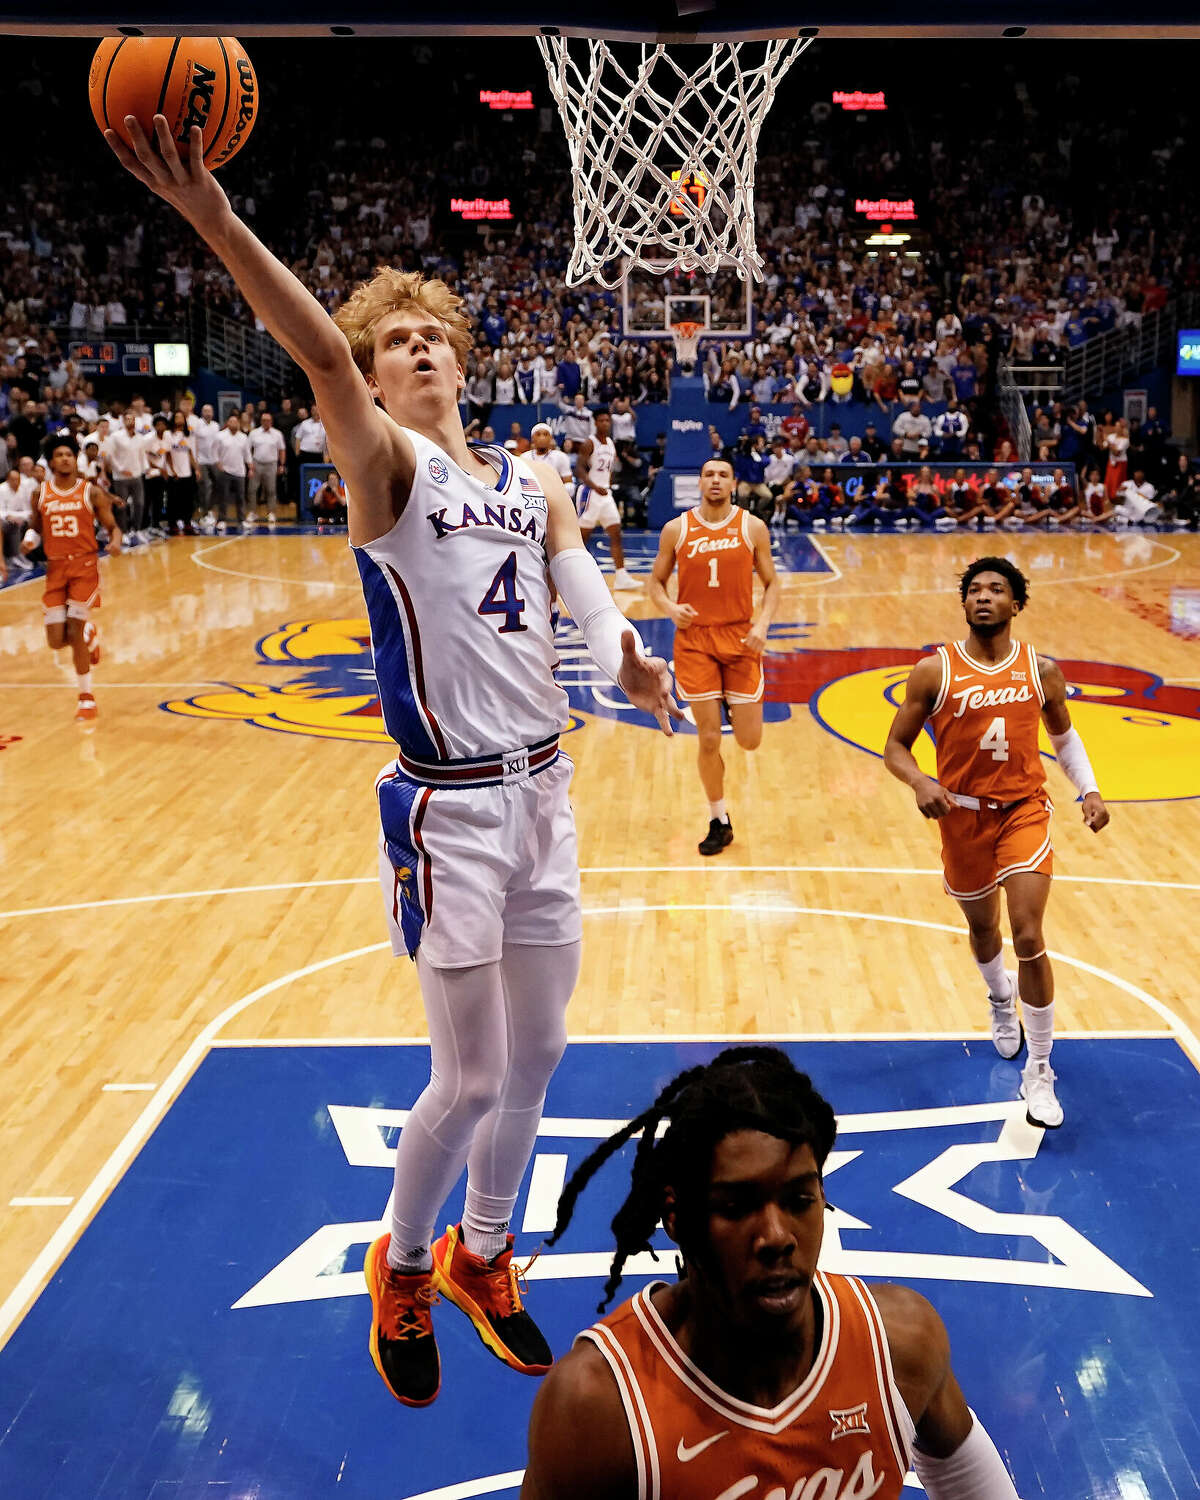 Kansas guard Gradey Dick (4) puts up a shot during the first half of an NCAA college basketball game against Texas Monday, Feb. 6, 2023, in Lawrence, Kan. (AP Photo/Charlie Riedel)